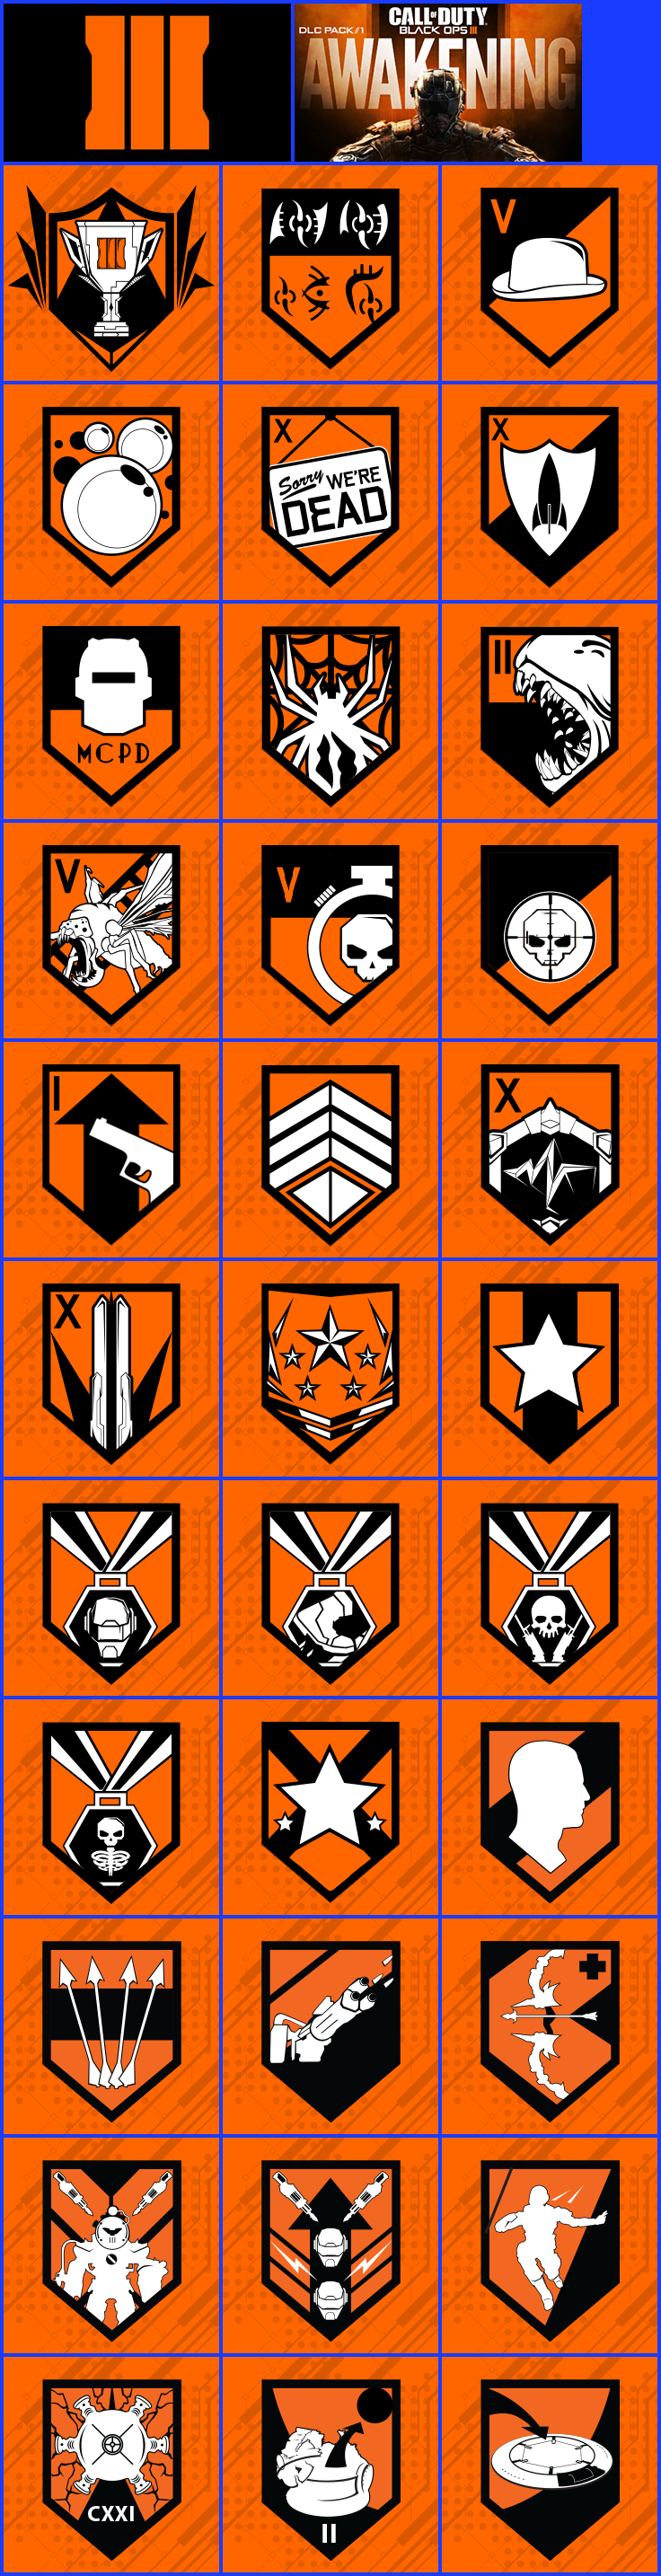 Trophy Banners & Icons